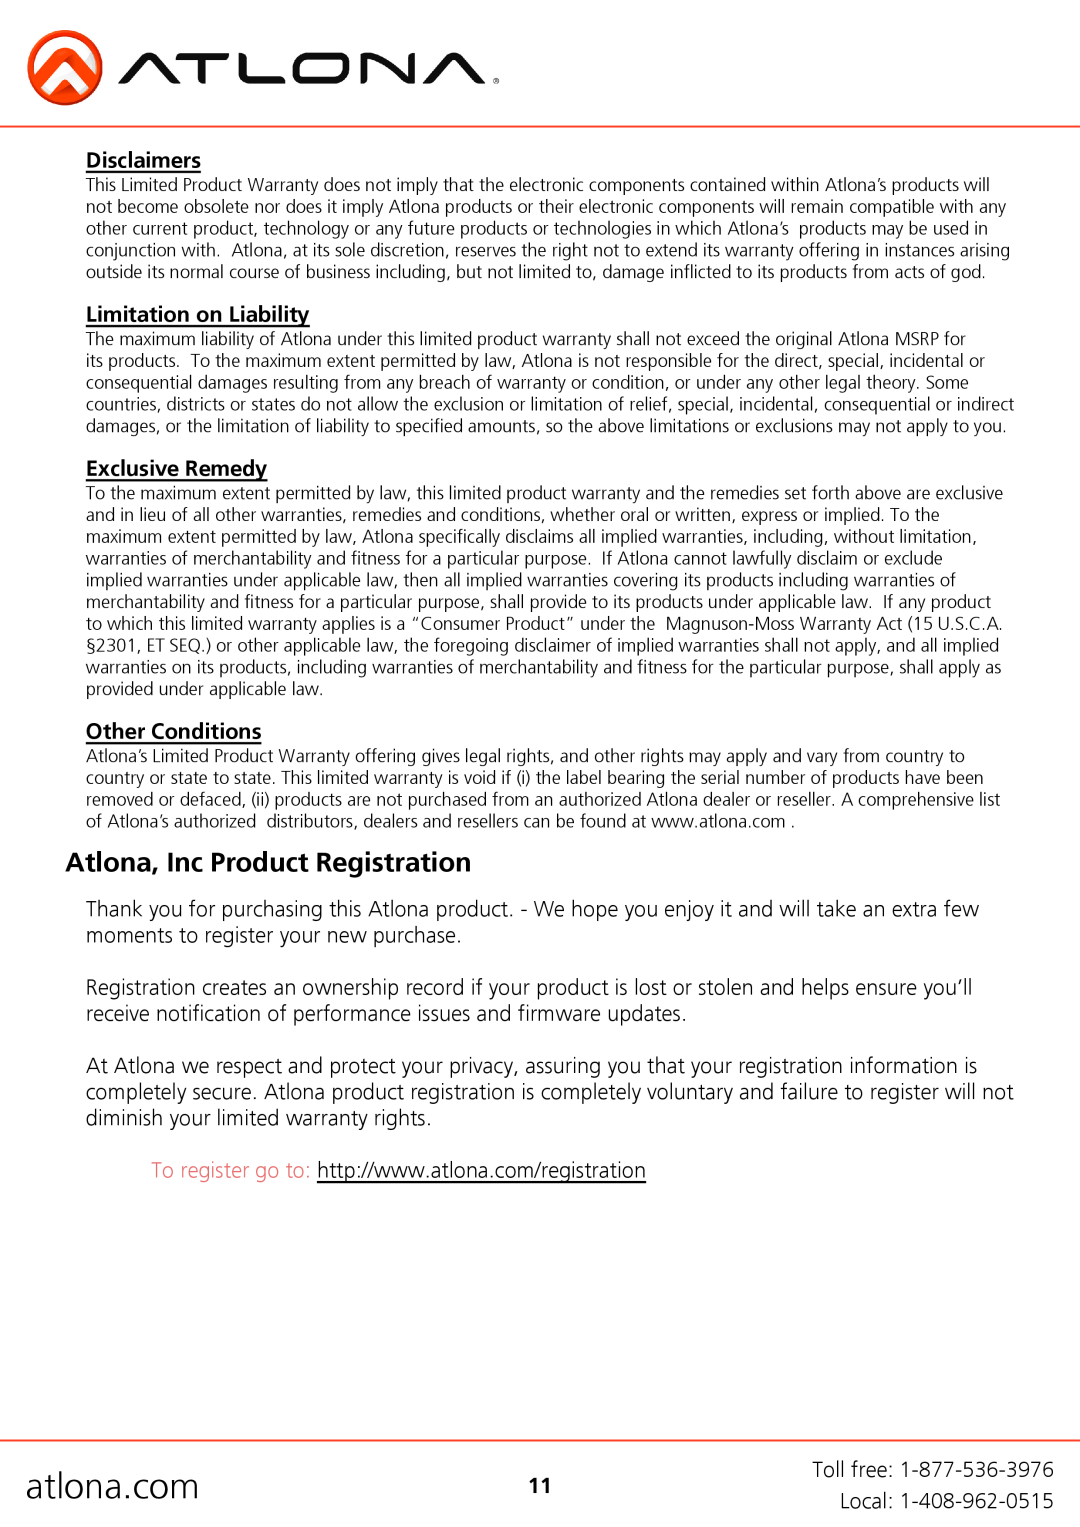 Atlona AT-HDVS-TX Atlona, Inc Product Registration, atlona.com, Disclaimers, Limitation on Liability, Exclusive Remedy 